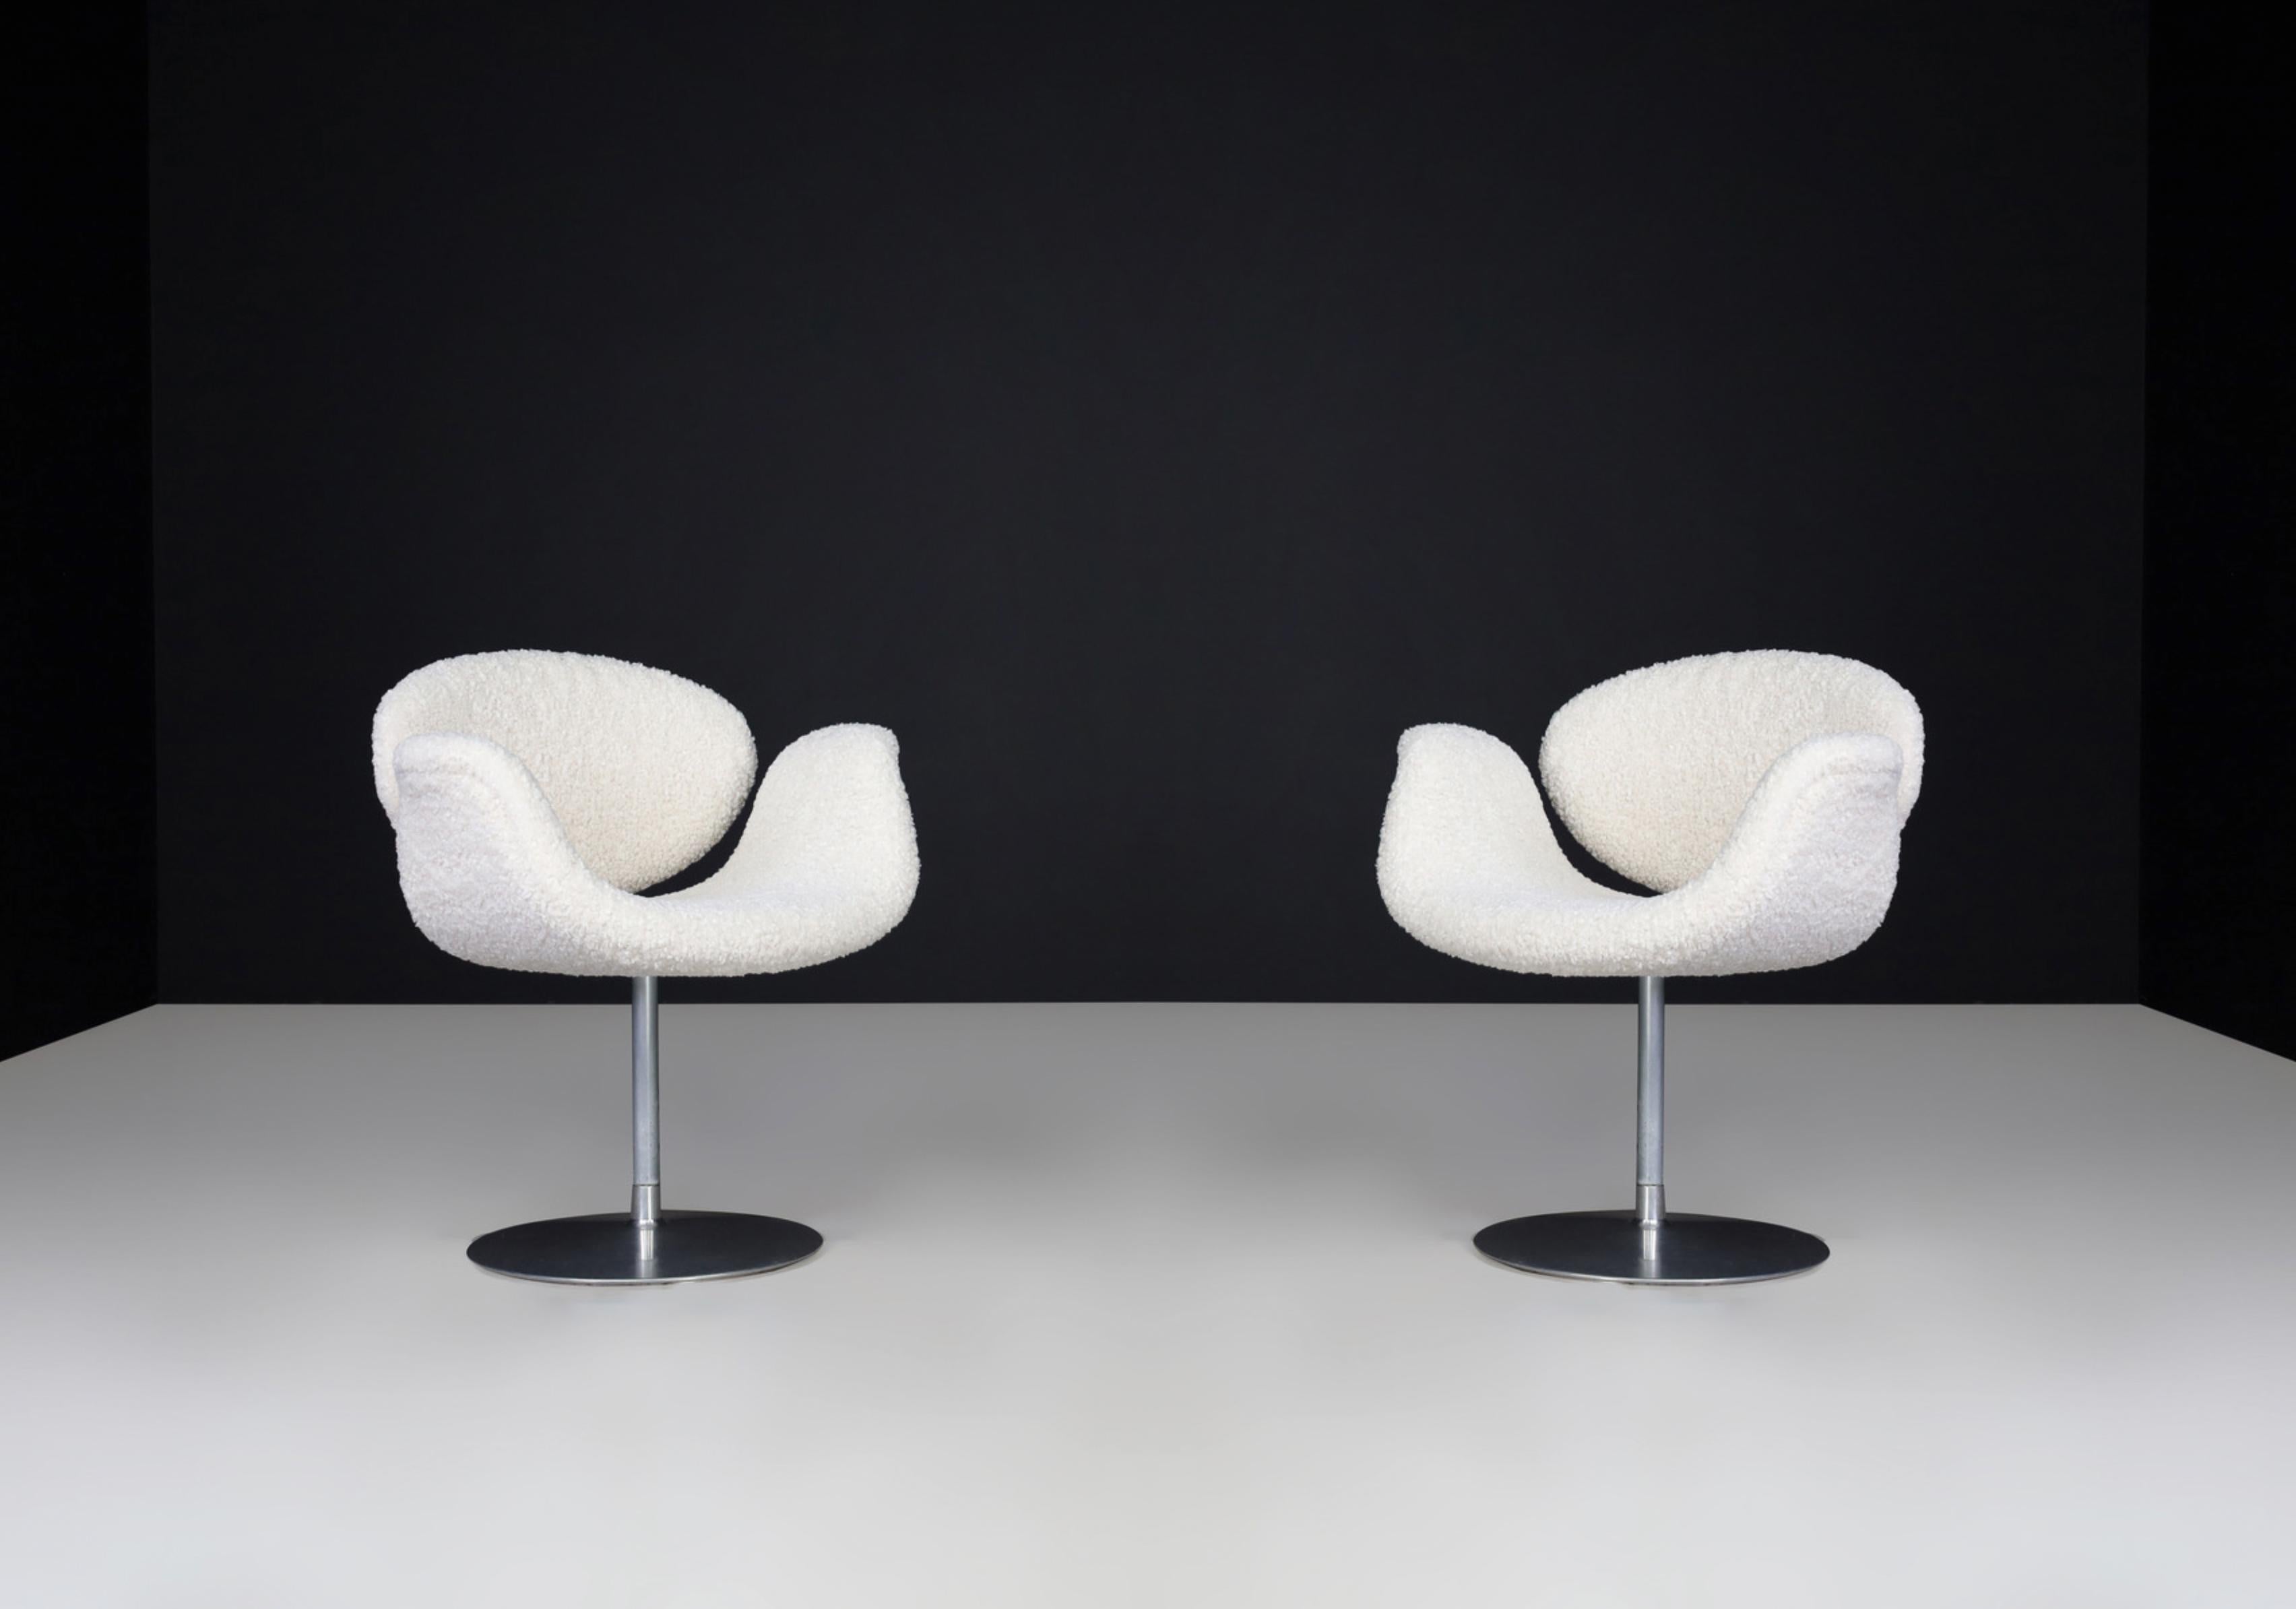 Mid-Century Little Tulip Armchairs in Bouclé by Pierre Paulin for Artifort, The Netherlands 1980s

The Little Tulip chair is a classic piece of furniture designed by Pierre Paulin for Artifort in the Netherlands in 1965. The chair features a